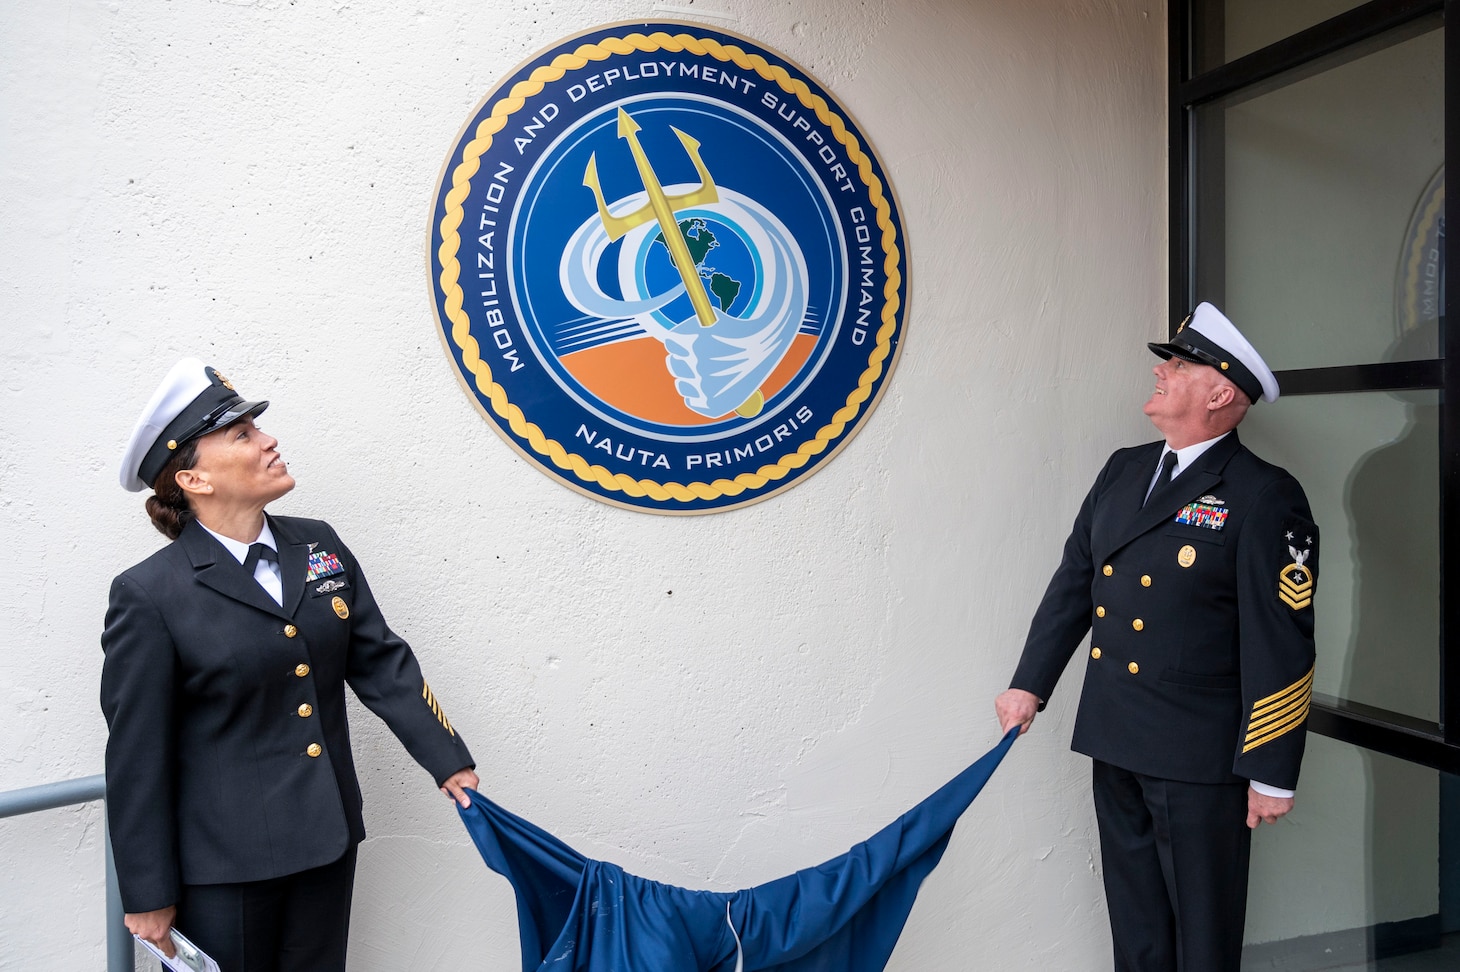 Command Master Chief Nicole Rios and Command Master Chief Michael Harvie unveil the seal for Mobilization and Deployment Support Command during the launch ceremony for Mobilization and Deployment Support Command.